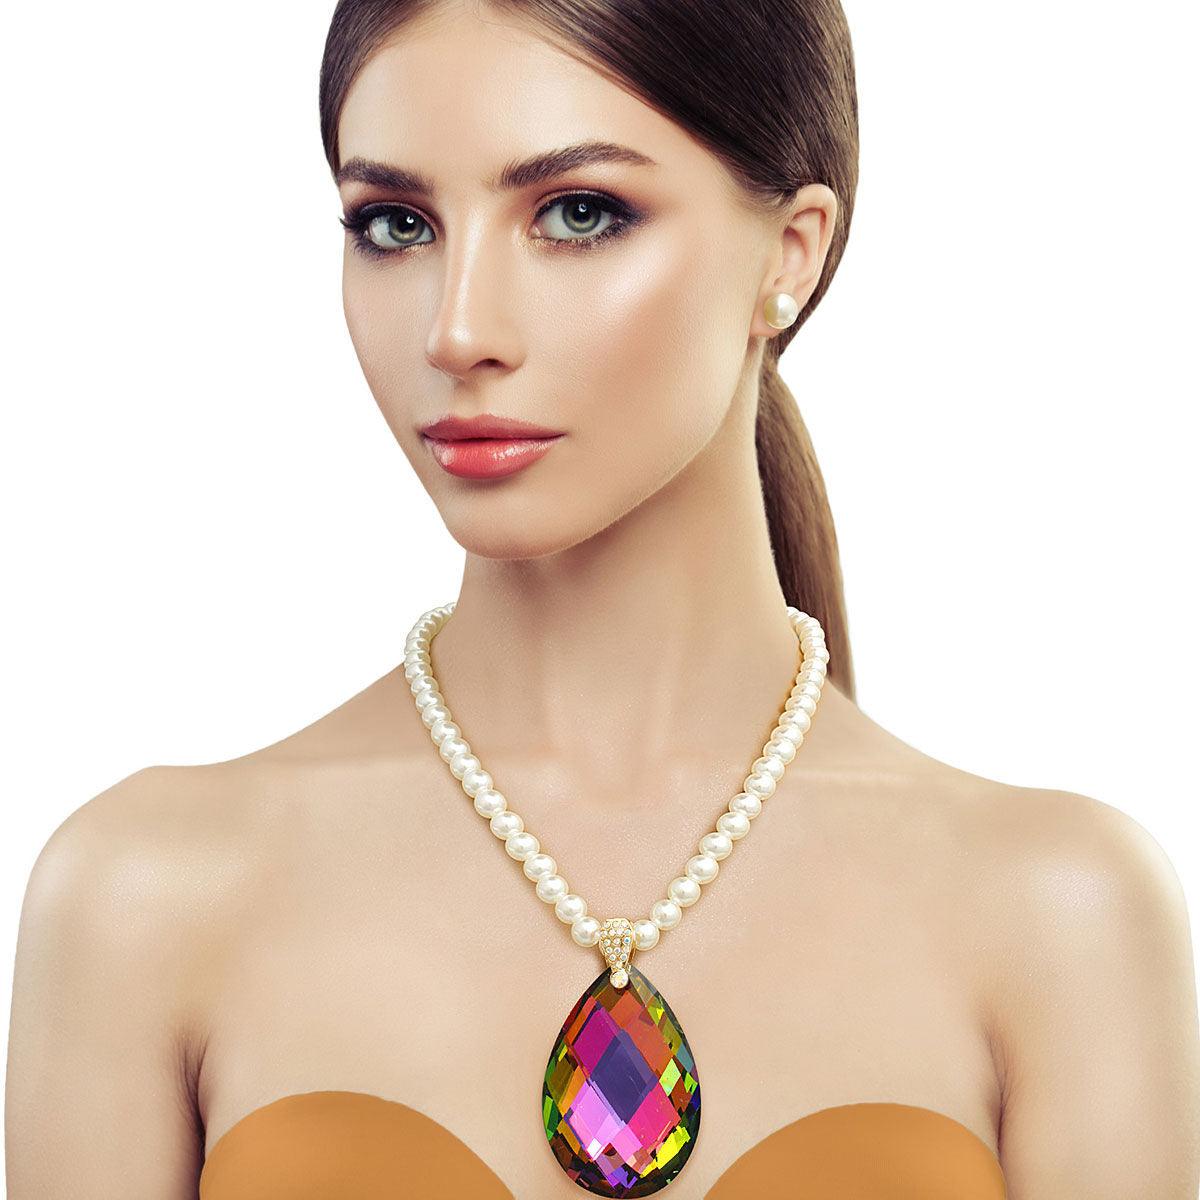 Harmonious Shades Pendant - Add Elegance with Faux Pearl Necklace